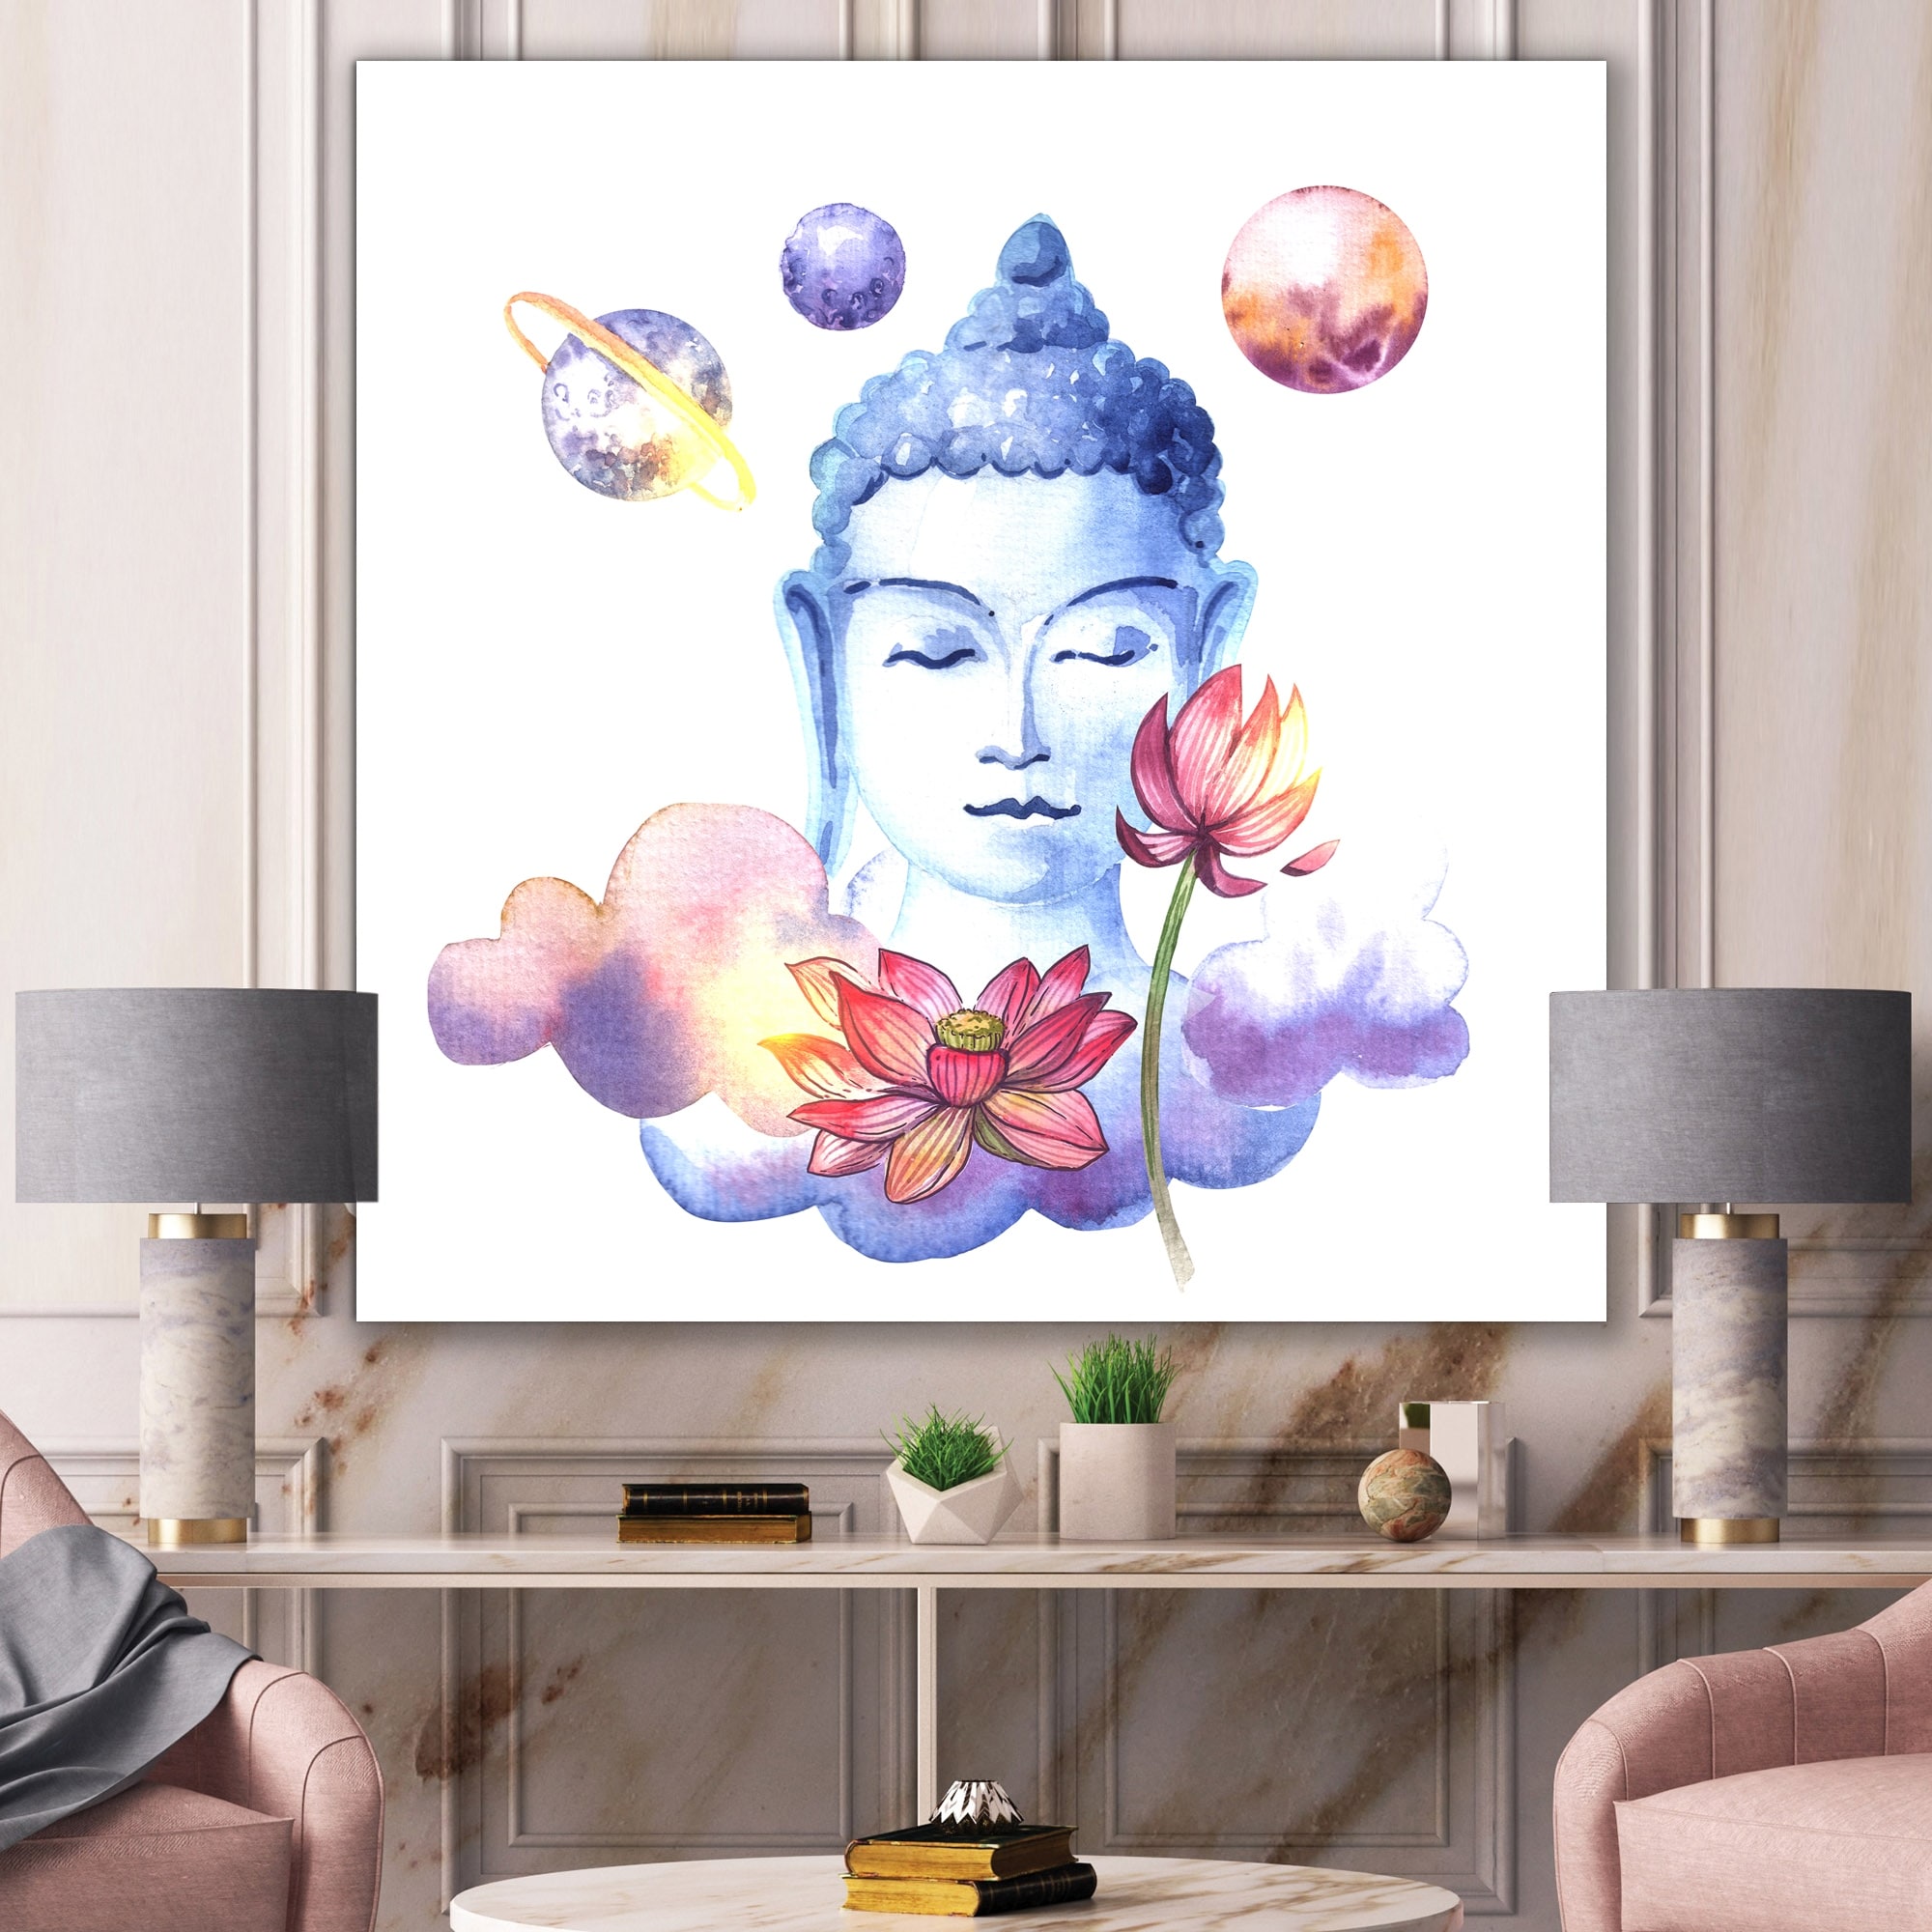 Designart Blue BuddHa With Flowers And Planets Modern